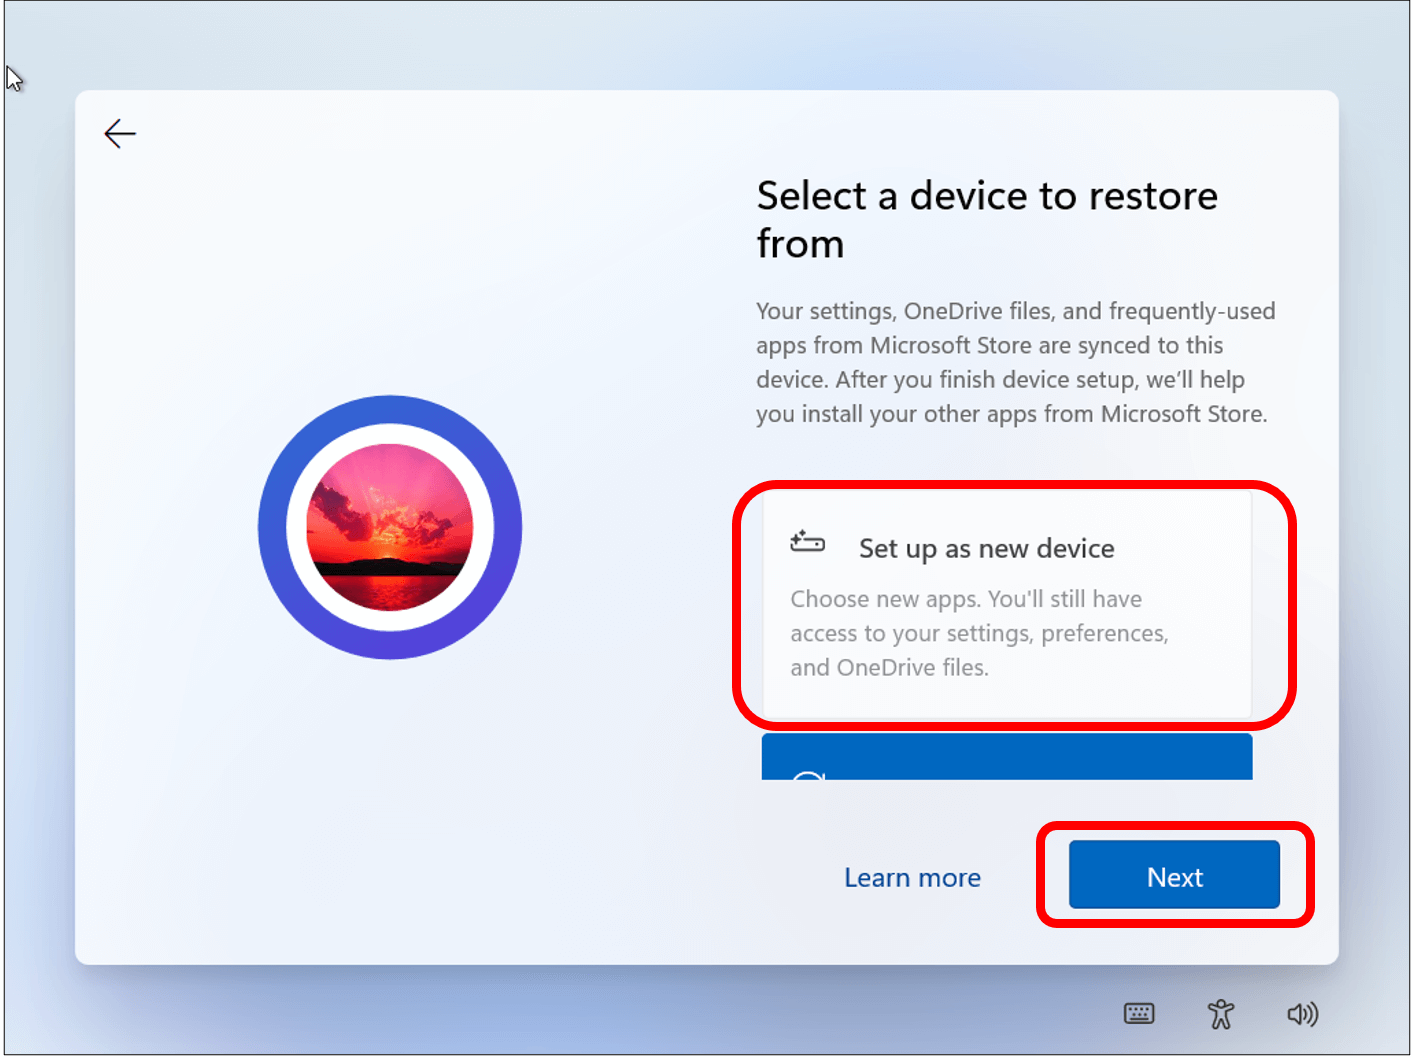 Select a device screen with Set up as new device highlighted to show how to set up a Windows computer as new device.